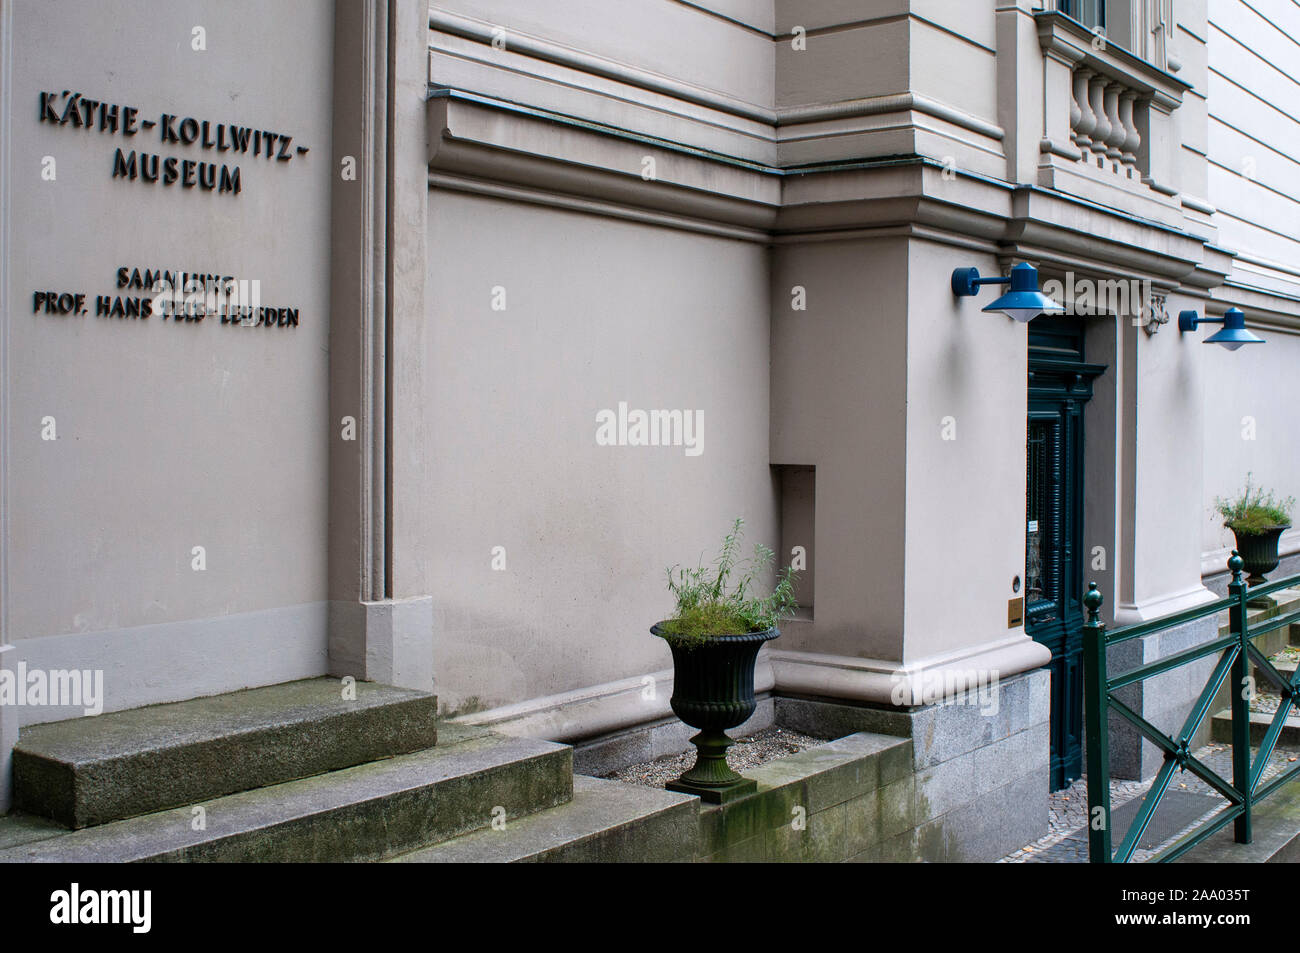 Entrance to the Käthe Kollwitz museum in Charlottenburg which features her art and sculpture, Berlin Germany Stock Photo